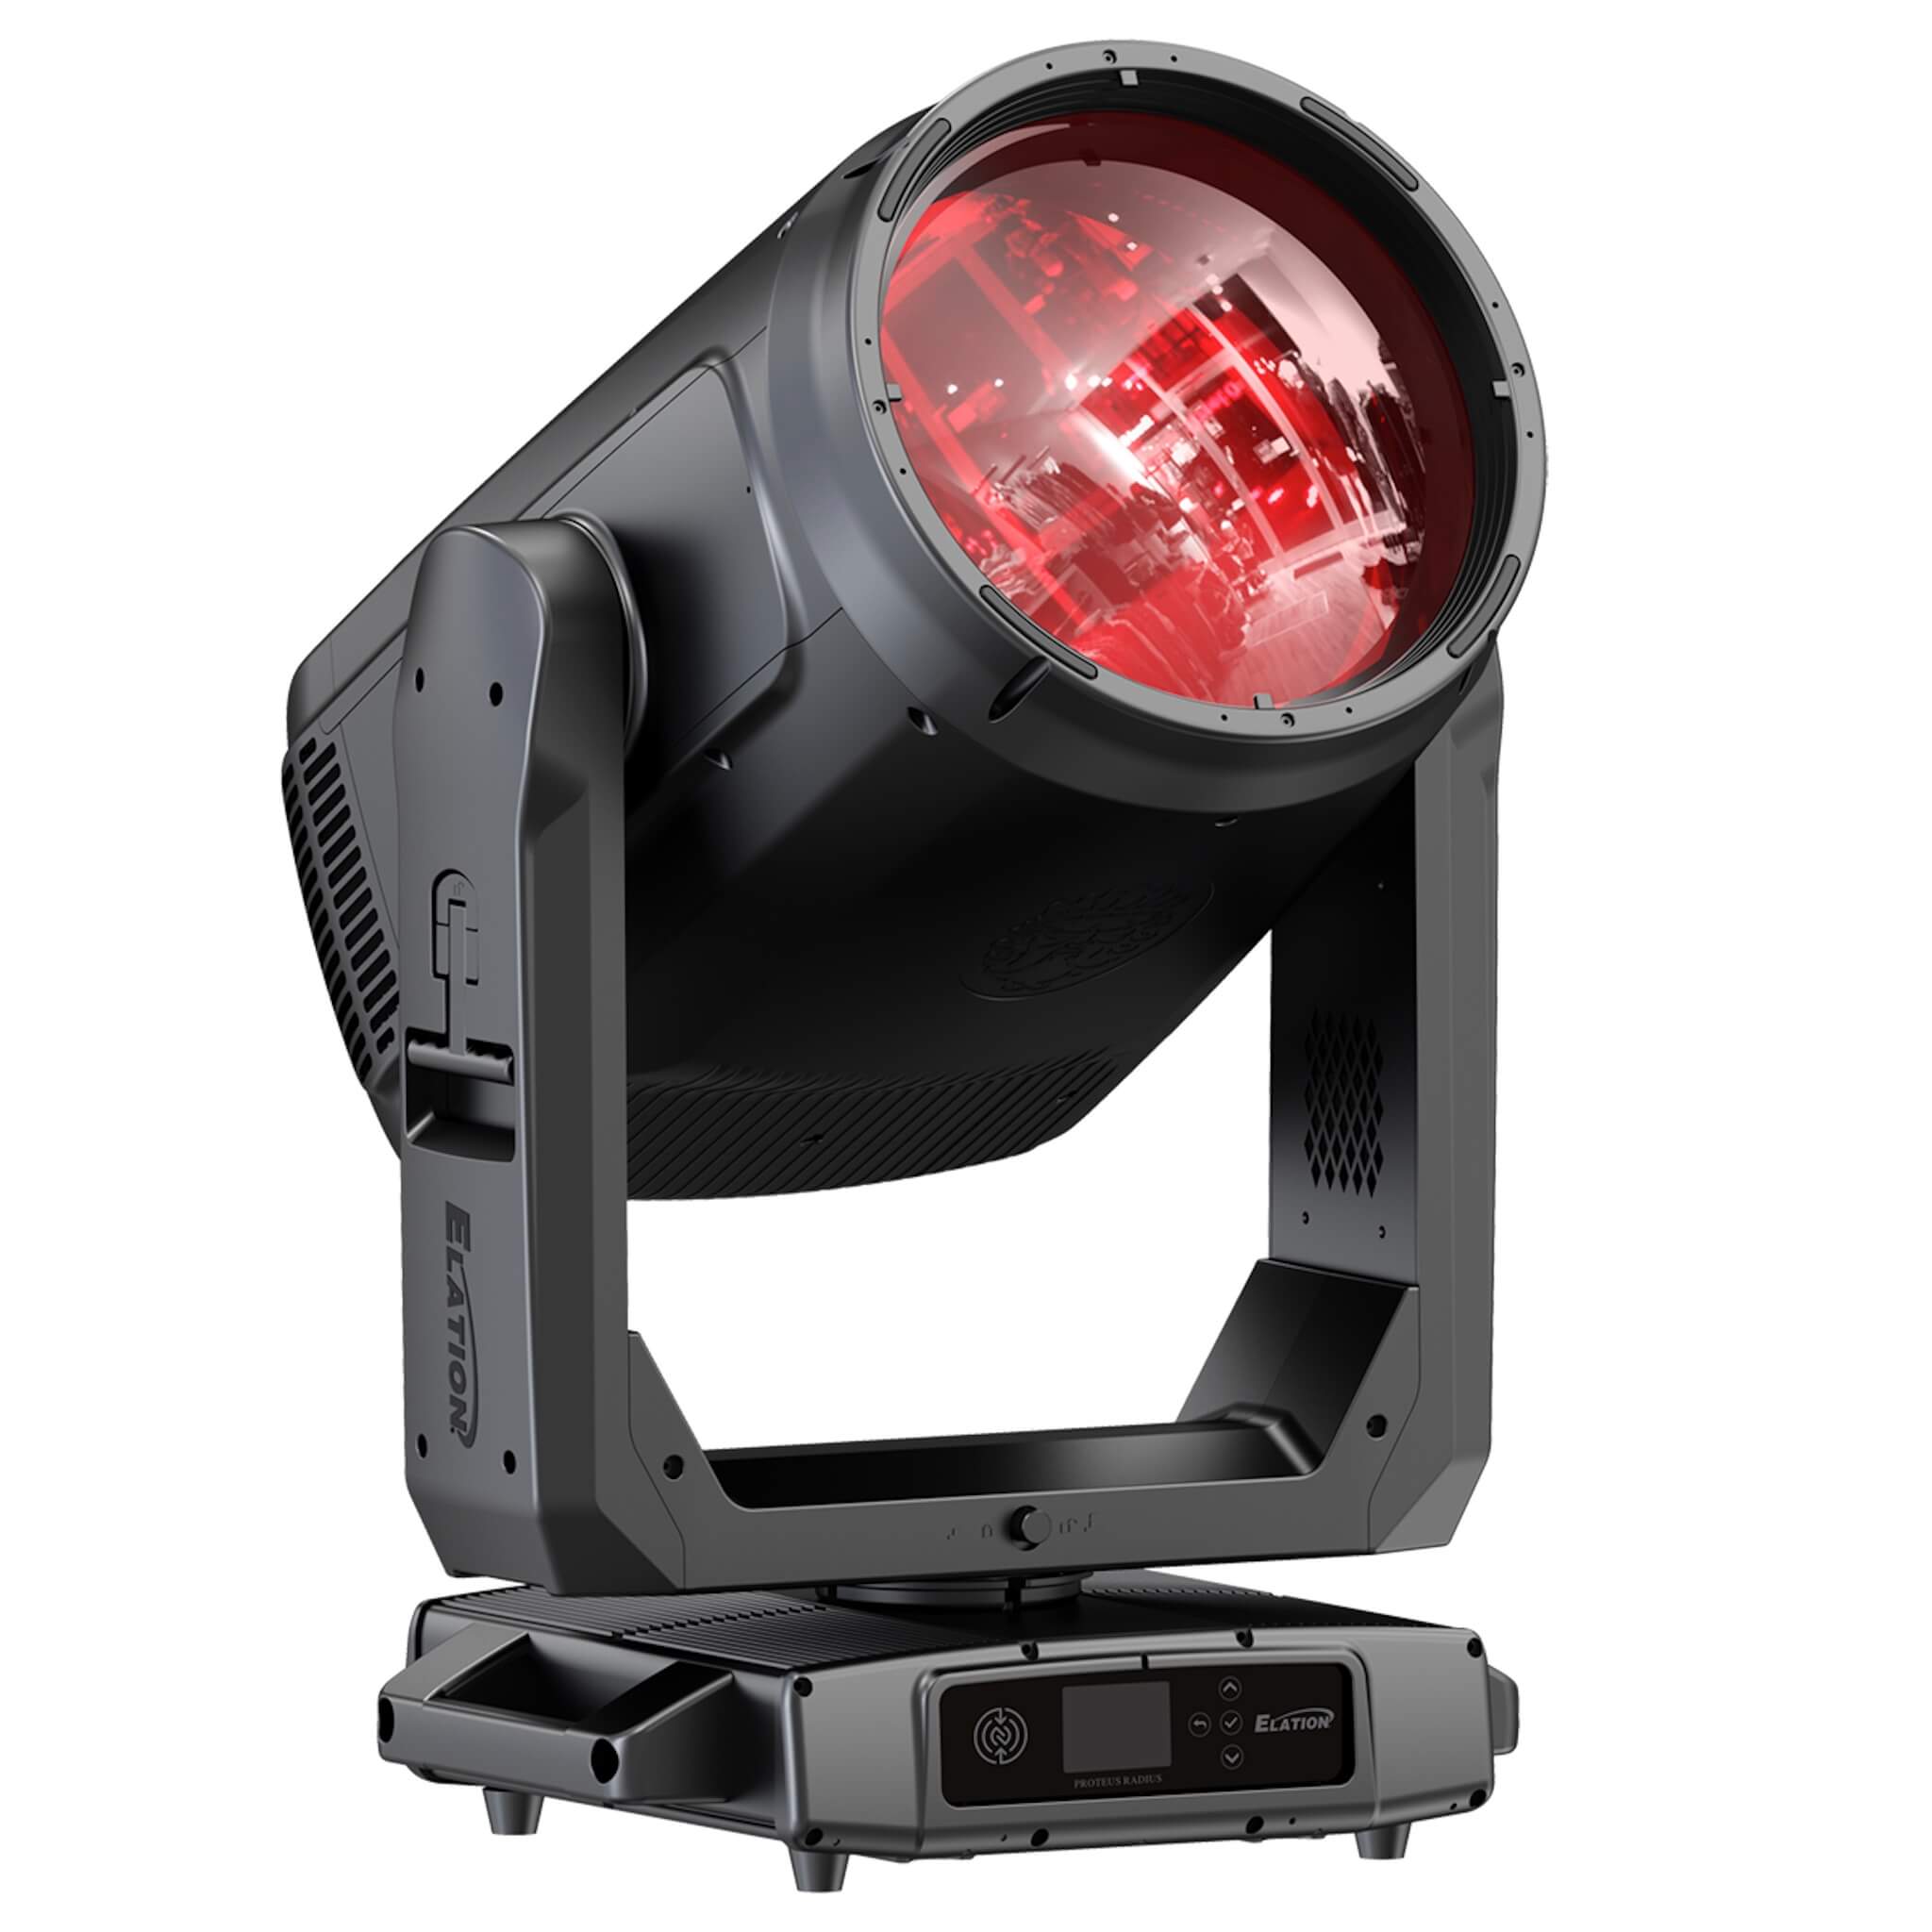 Elation Proteus Atlas - 500W Solid State Beam FX Fixture, angle